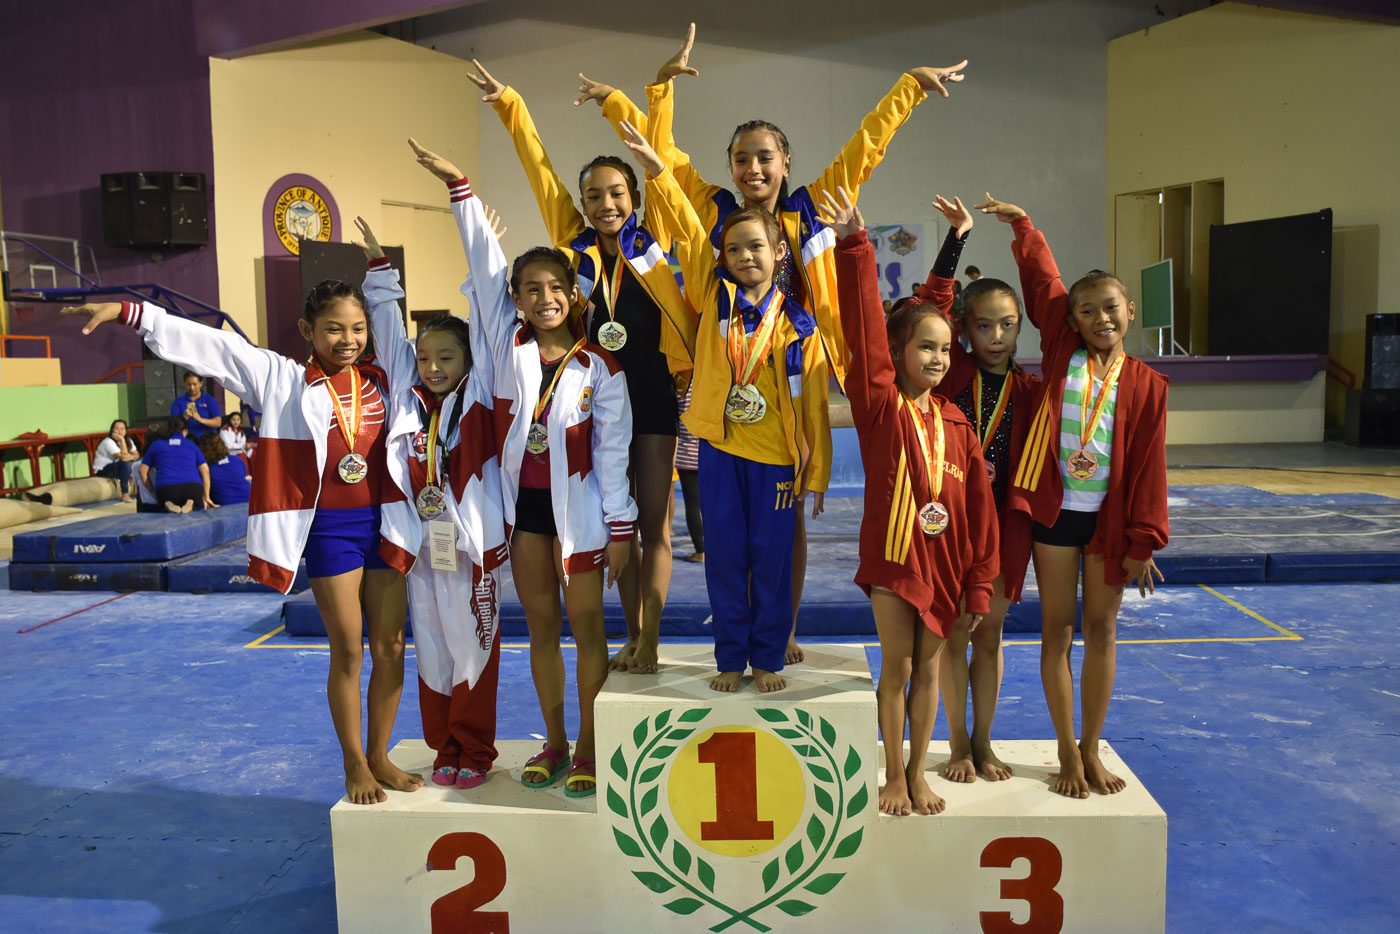 NCR reigns supreme in gymnastics with 33 golds on 2nd day of Palaro 2017